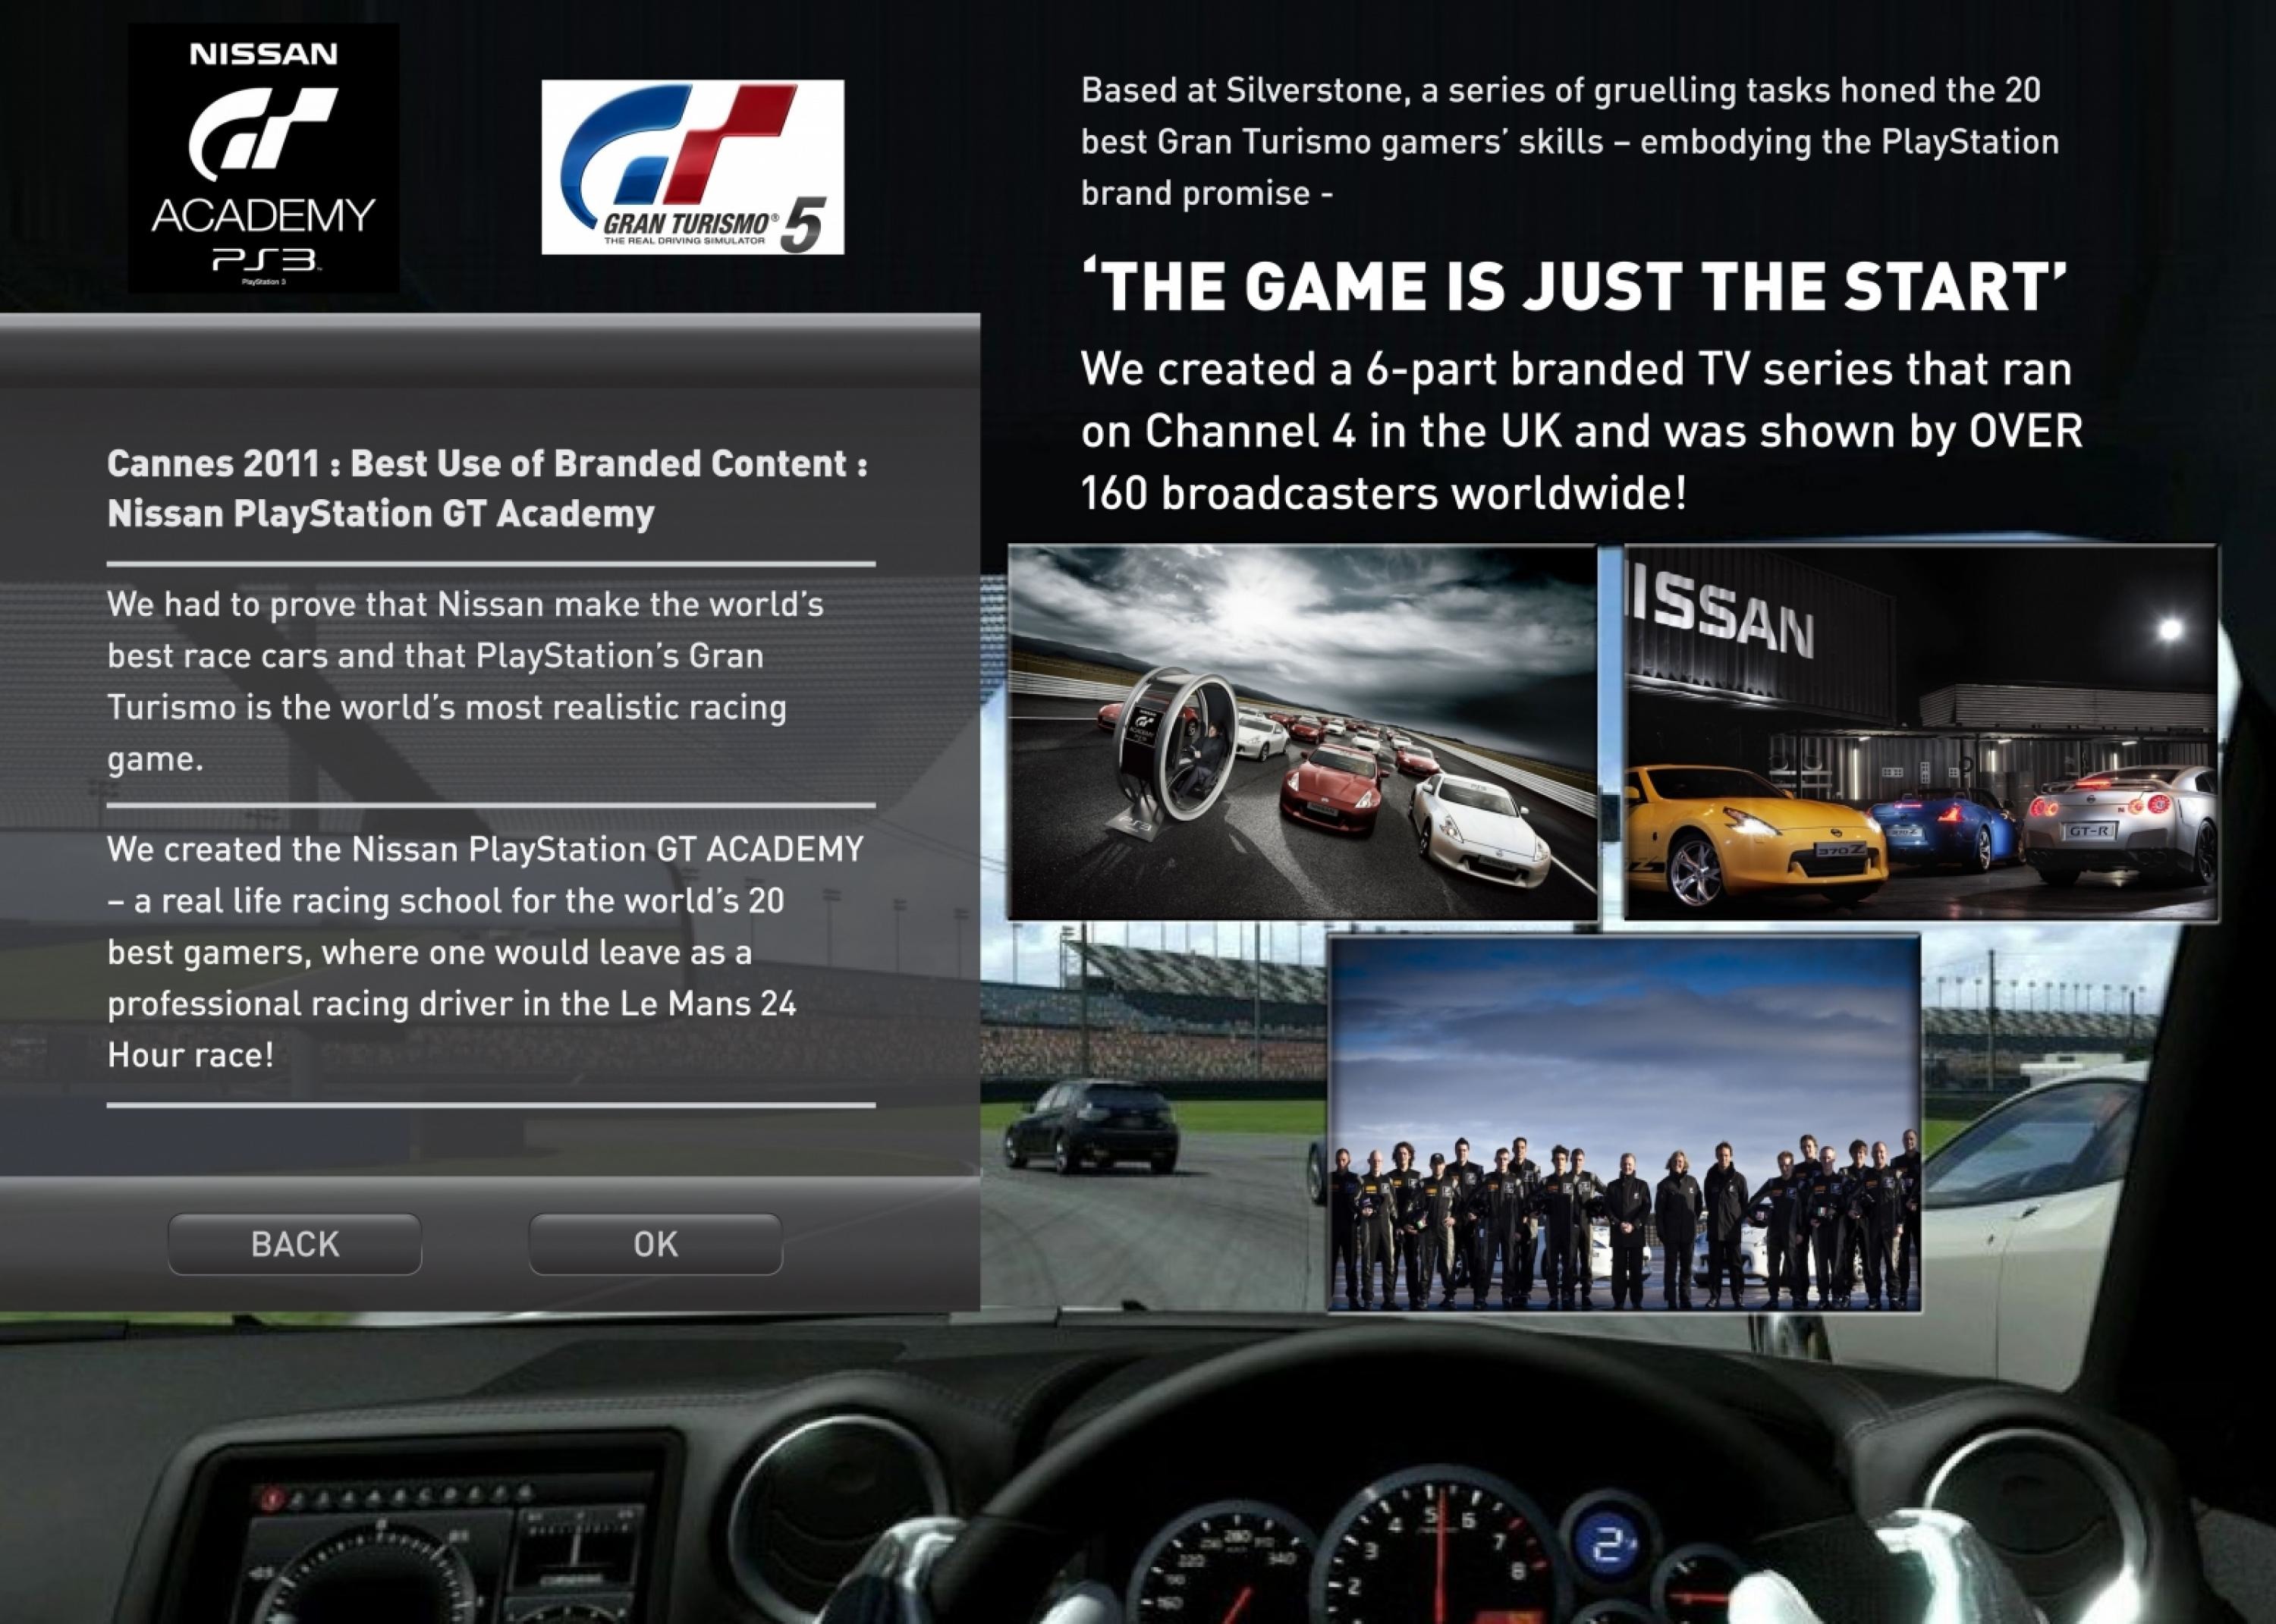 NISSAN SPORTS CARS AND GRAN TURISMO 5